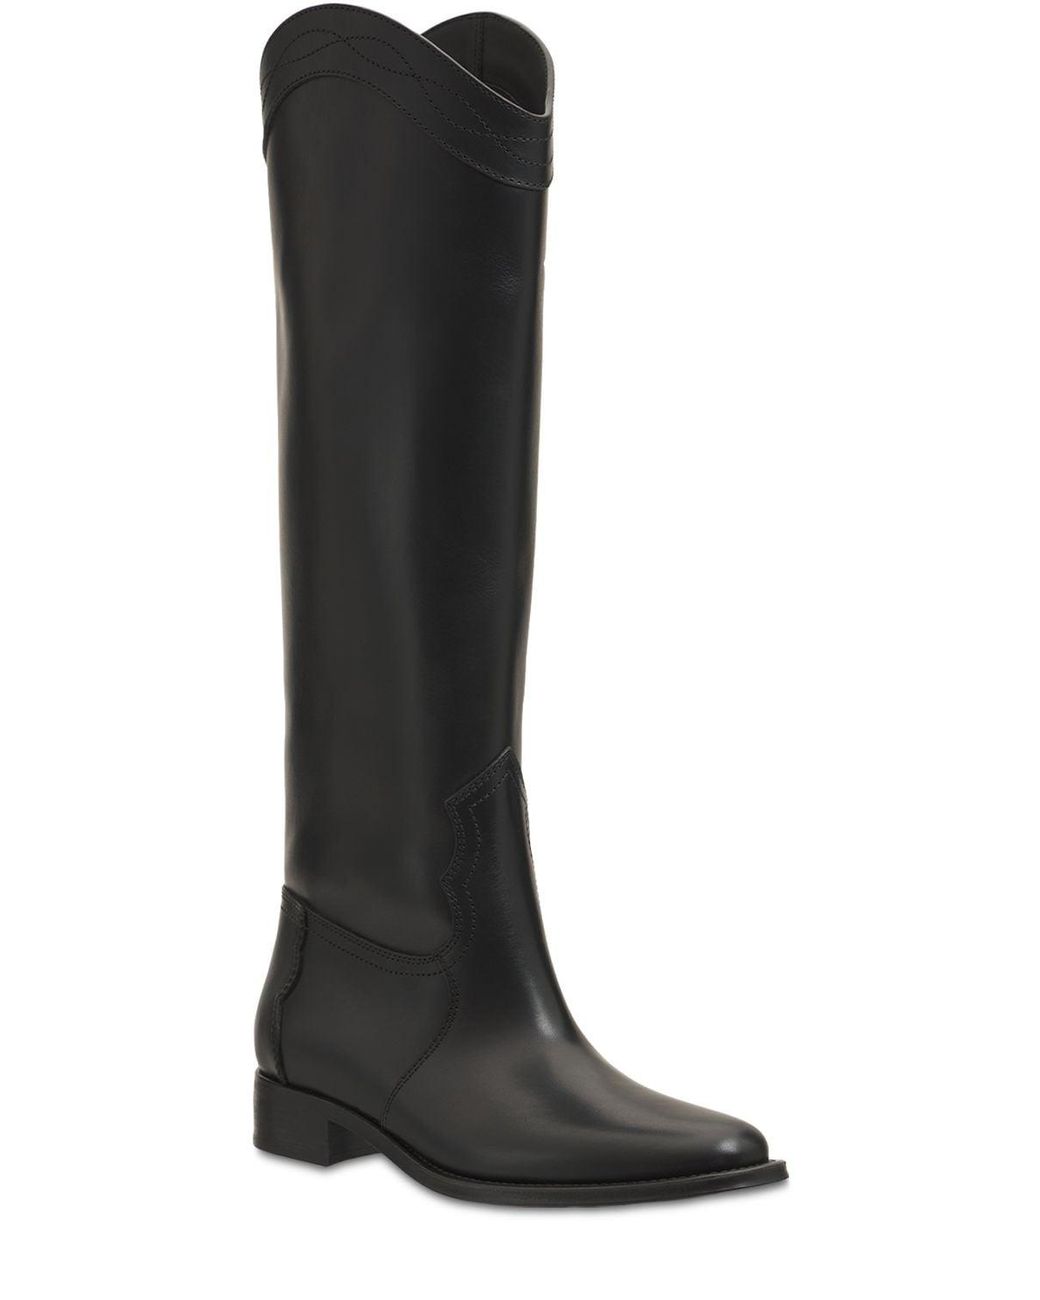 Saint Laurent 30mm Kate Leather Tall Boots in Black | Lyst